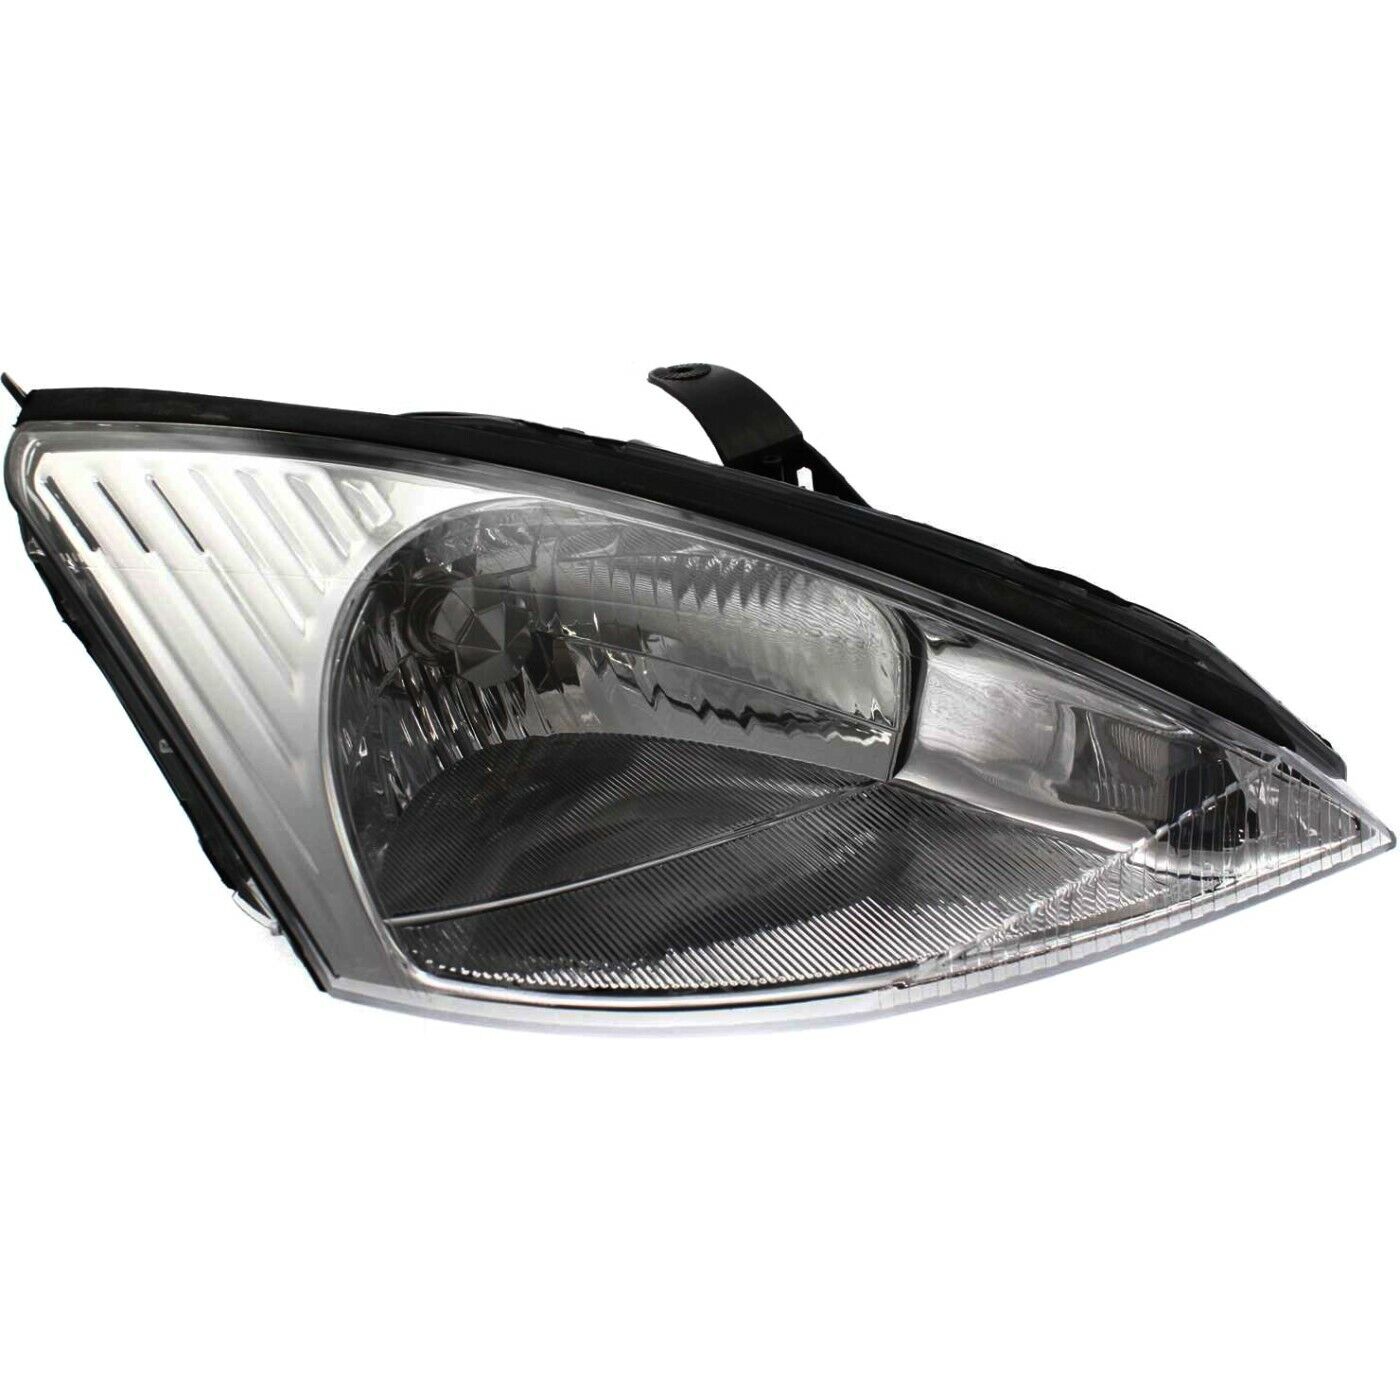 Headlight For 2000 2001 2002 Ford Focus Right Clear Lens With Bulb